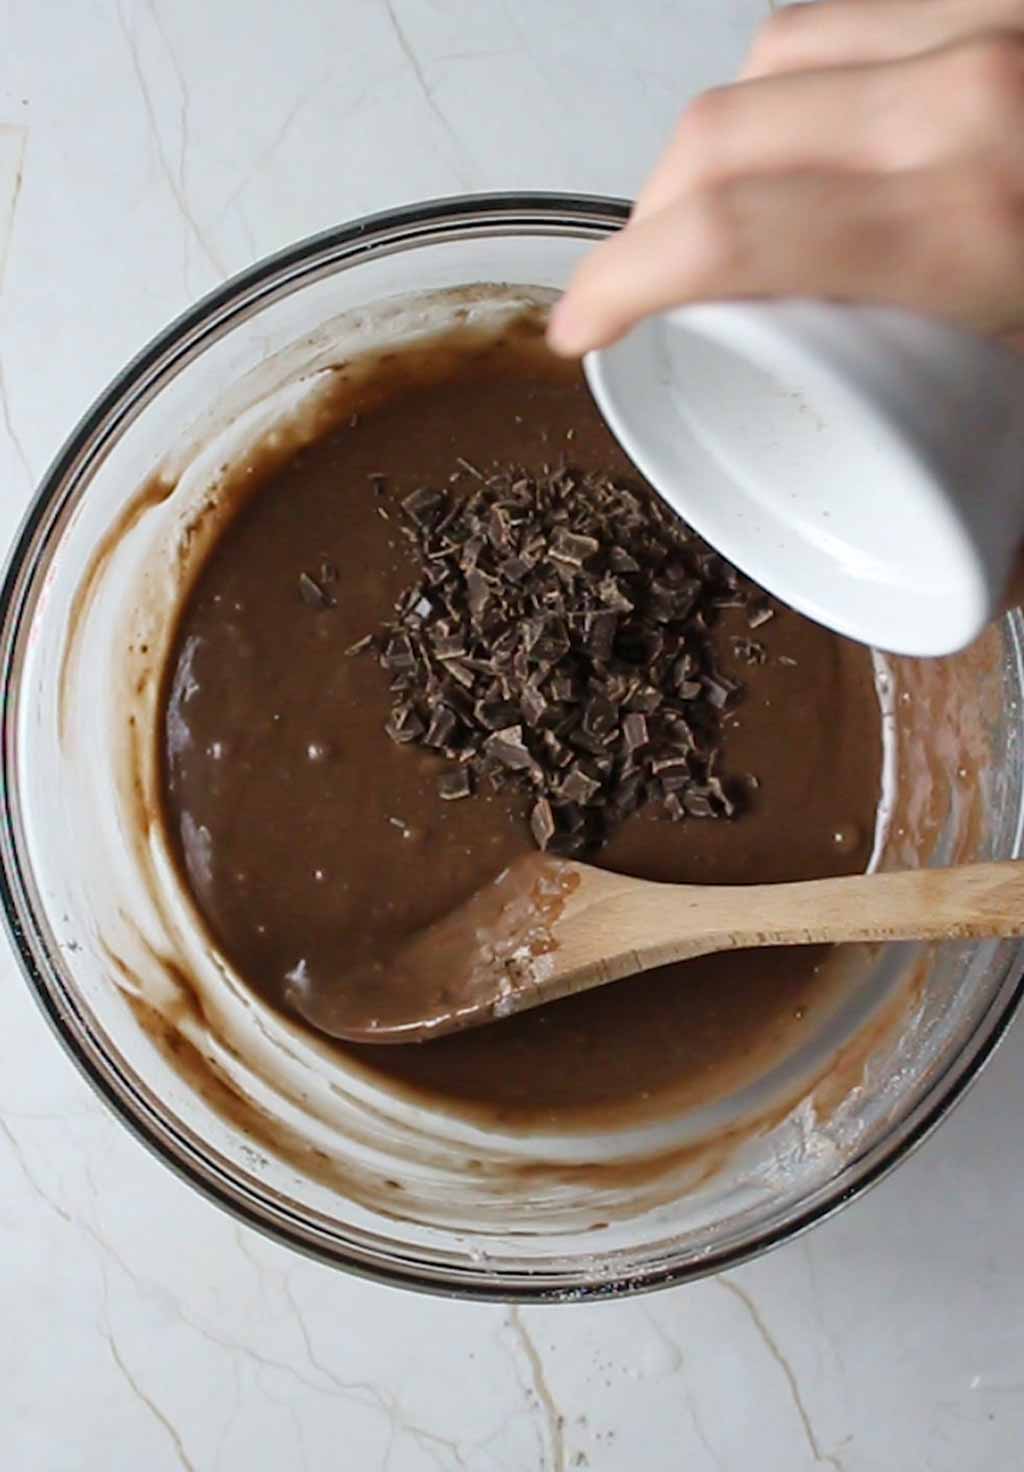 pouring chocolate chunks into the bowl of cake batter